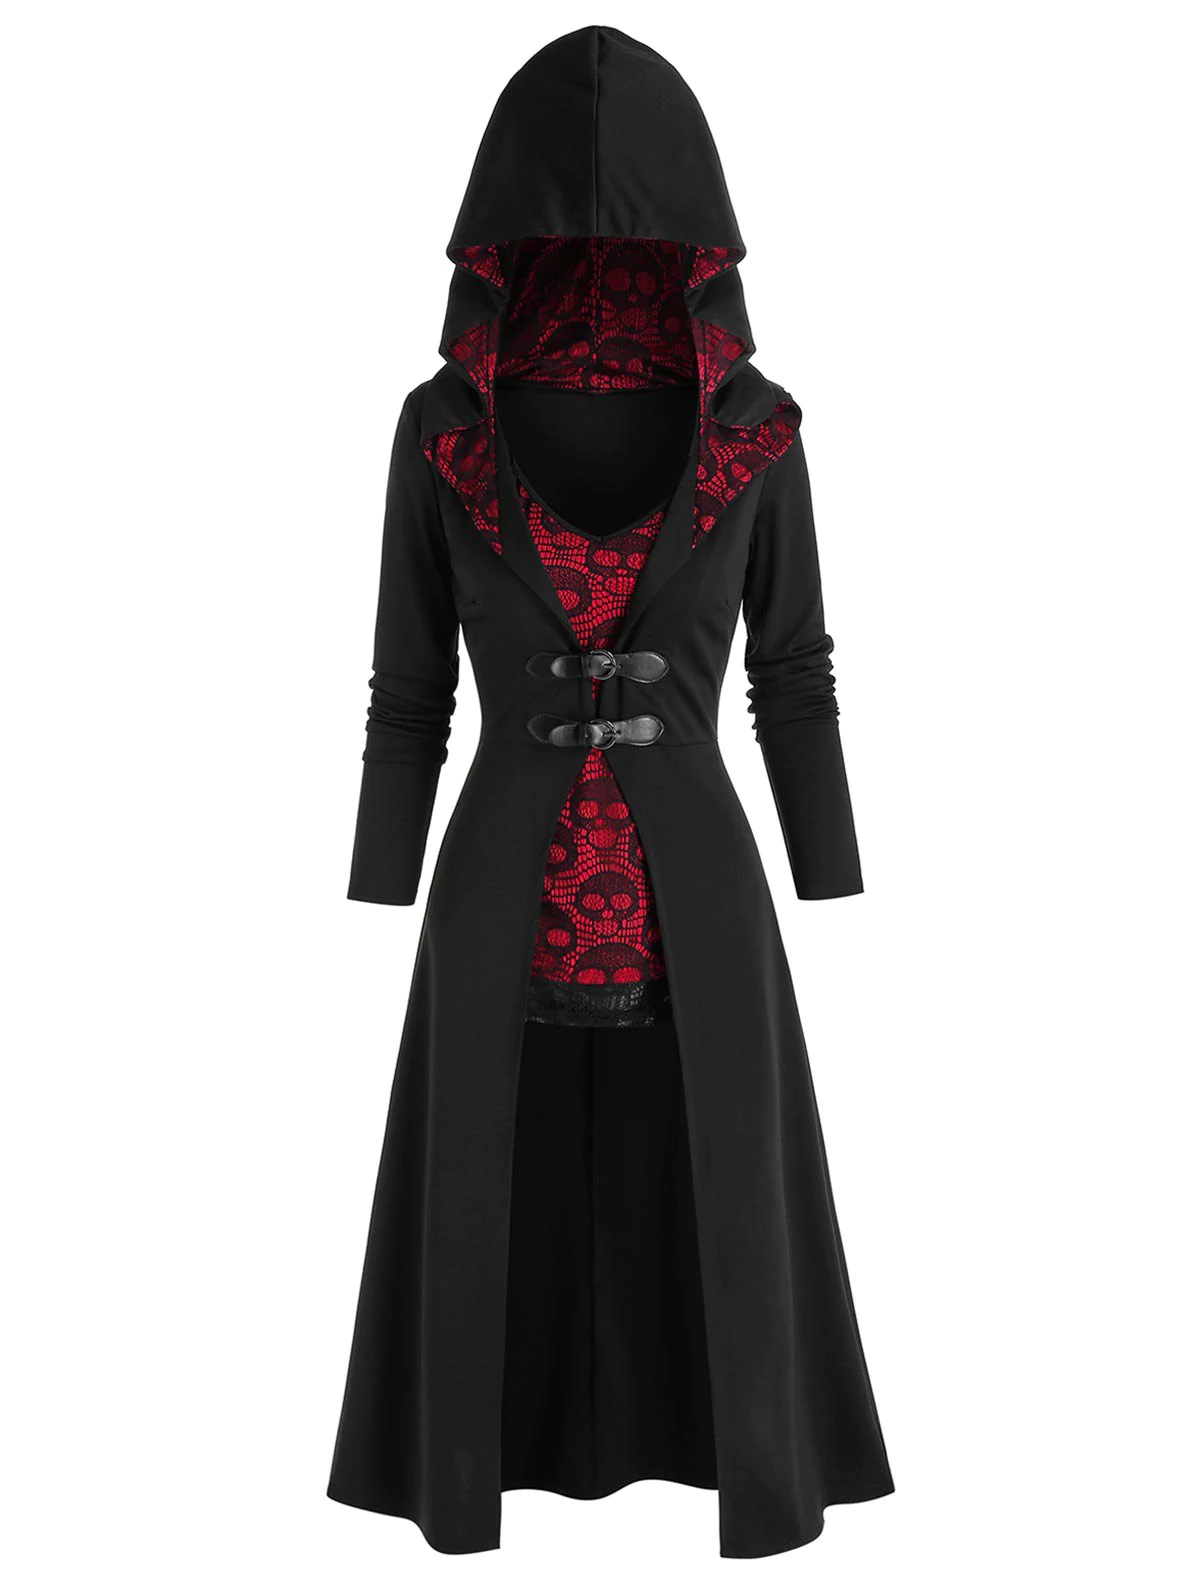 Halloween Buckles Long Coat and Skull Lace Tank Top Set